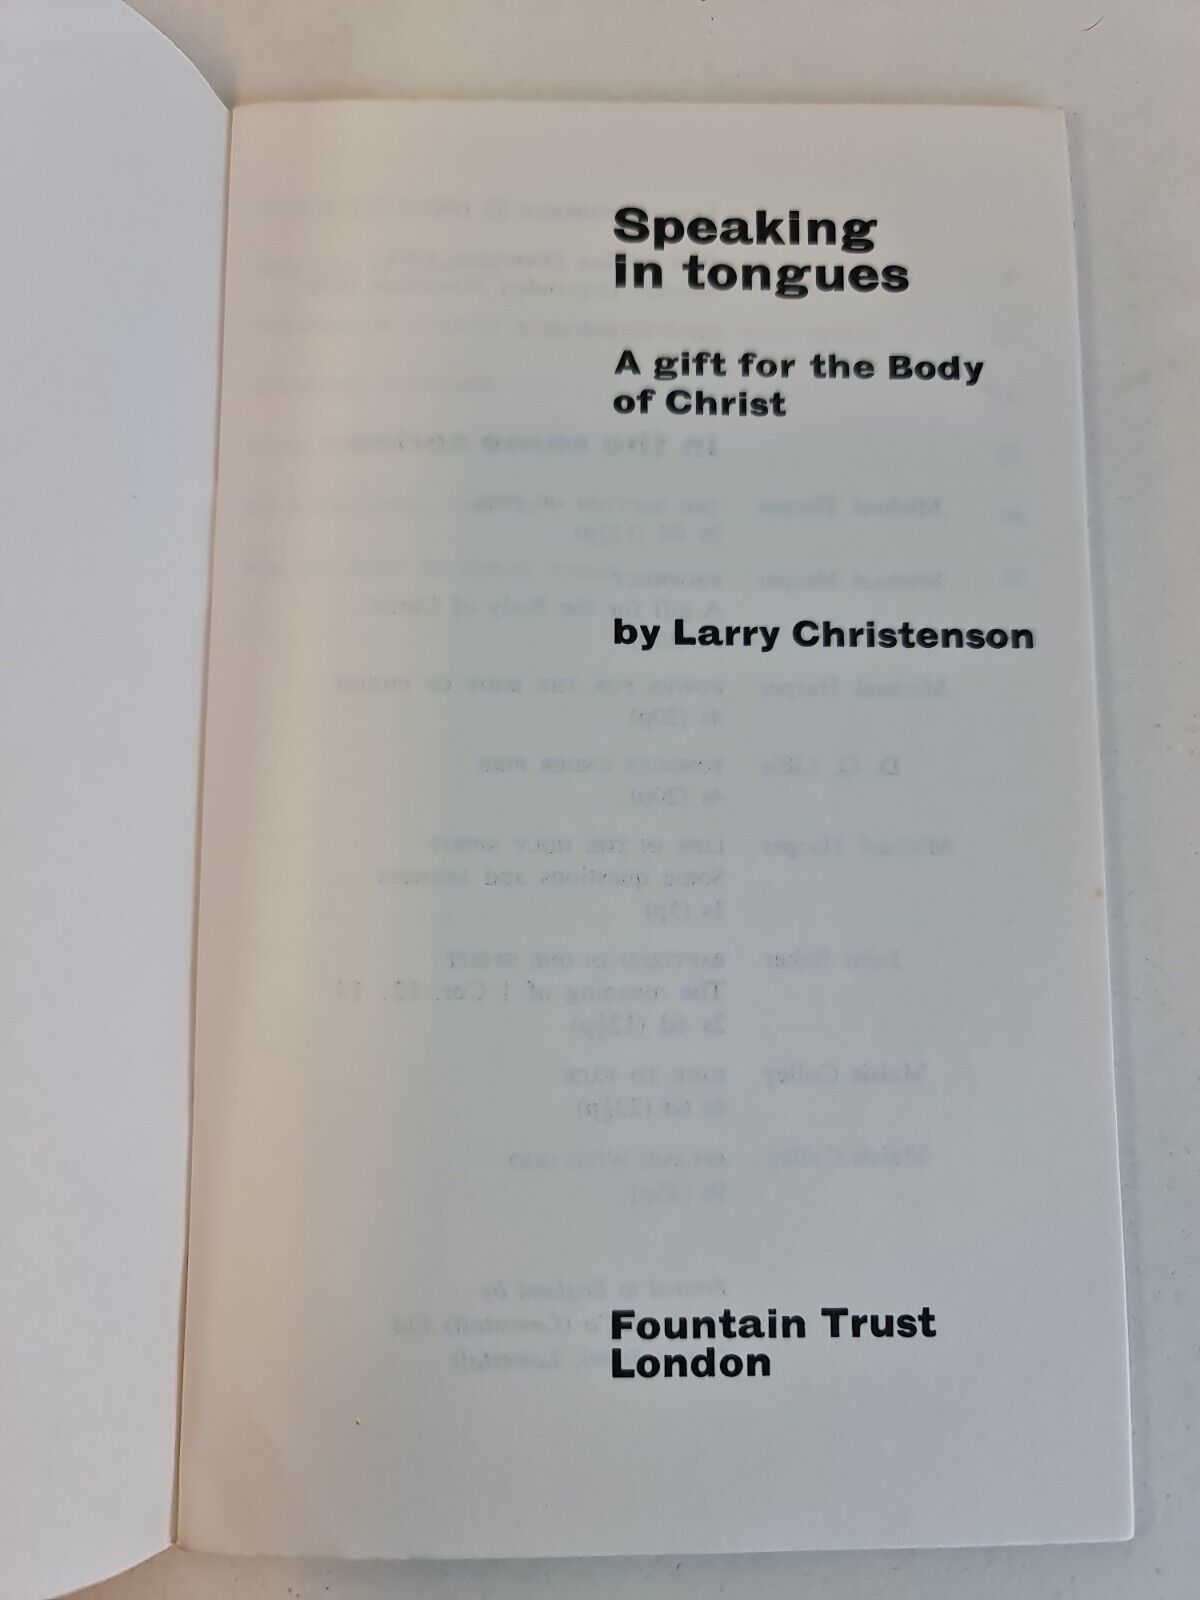 Speaking In Tongues A Gift For The Body Of Christ by Larry Christenson(1970)